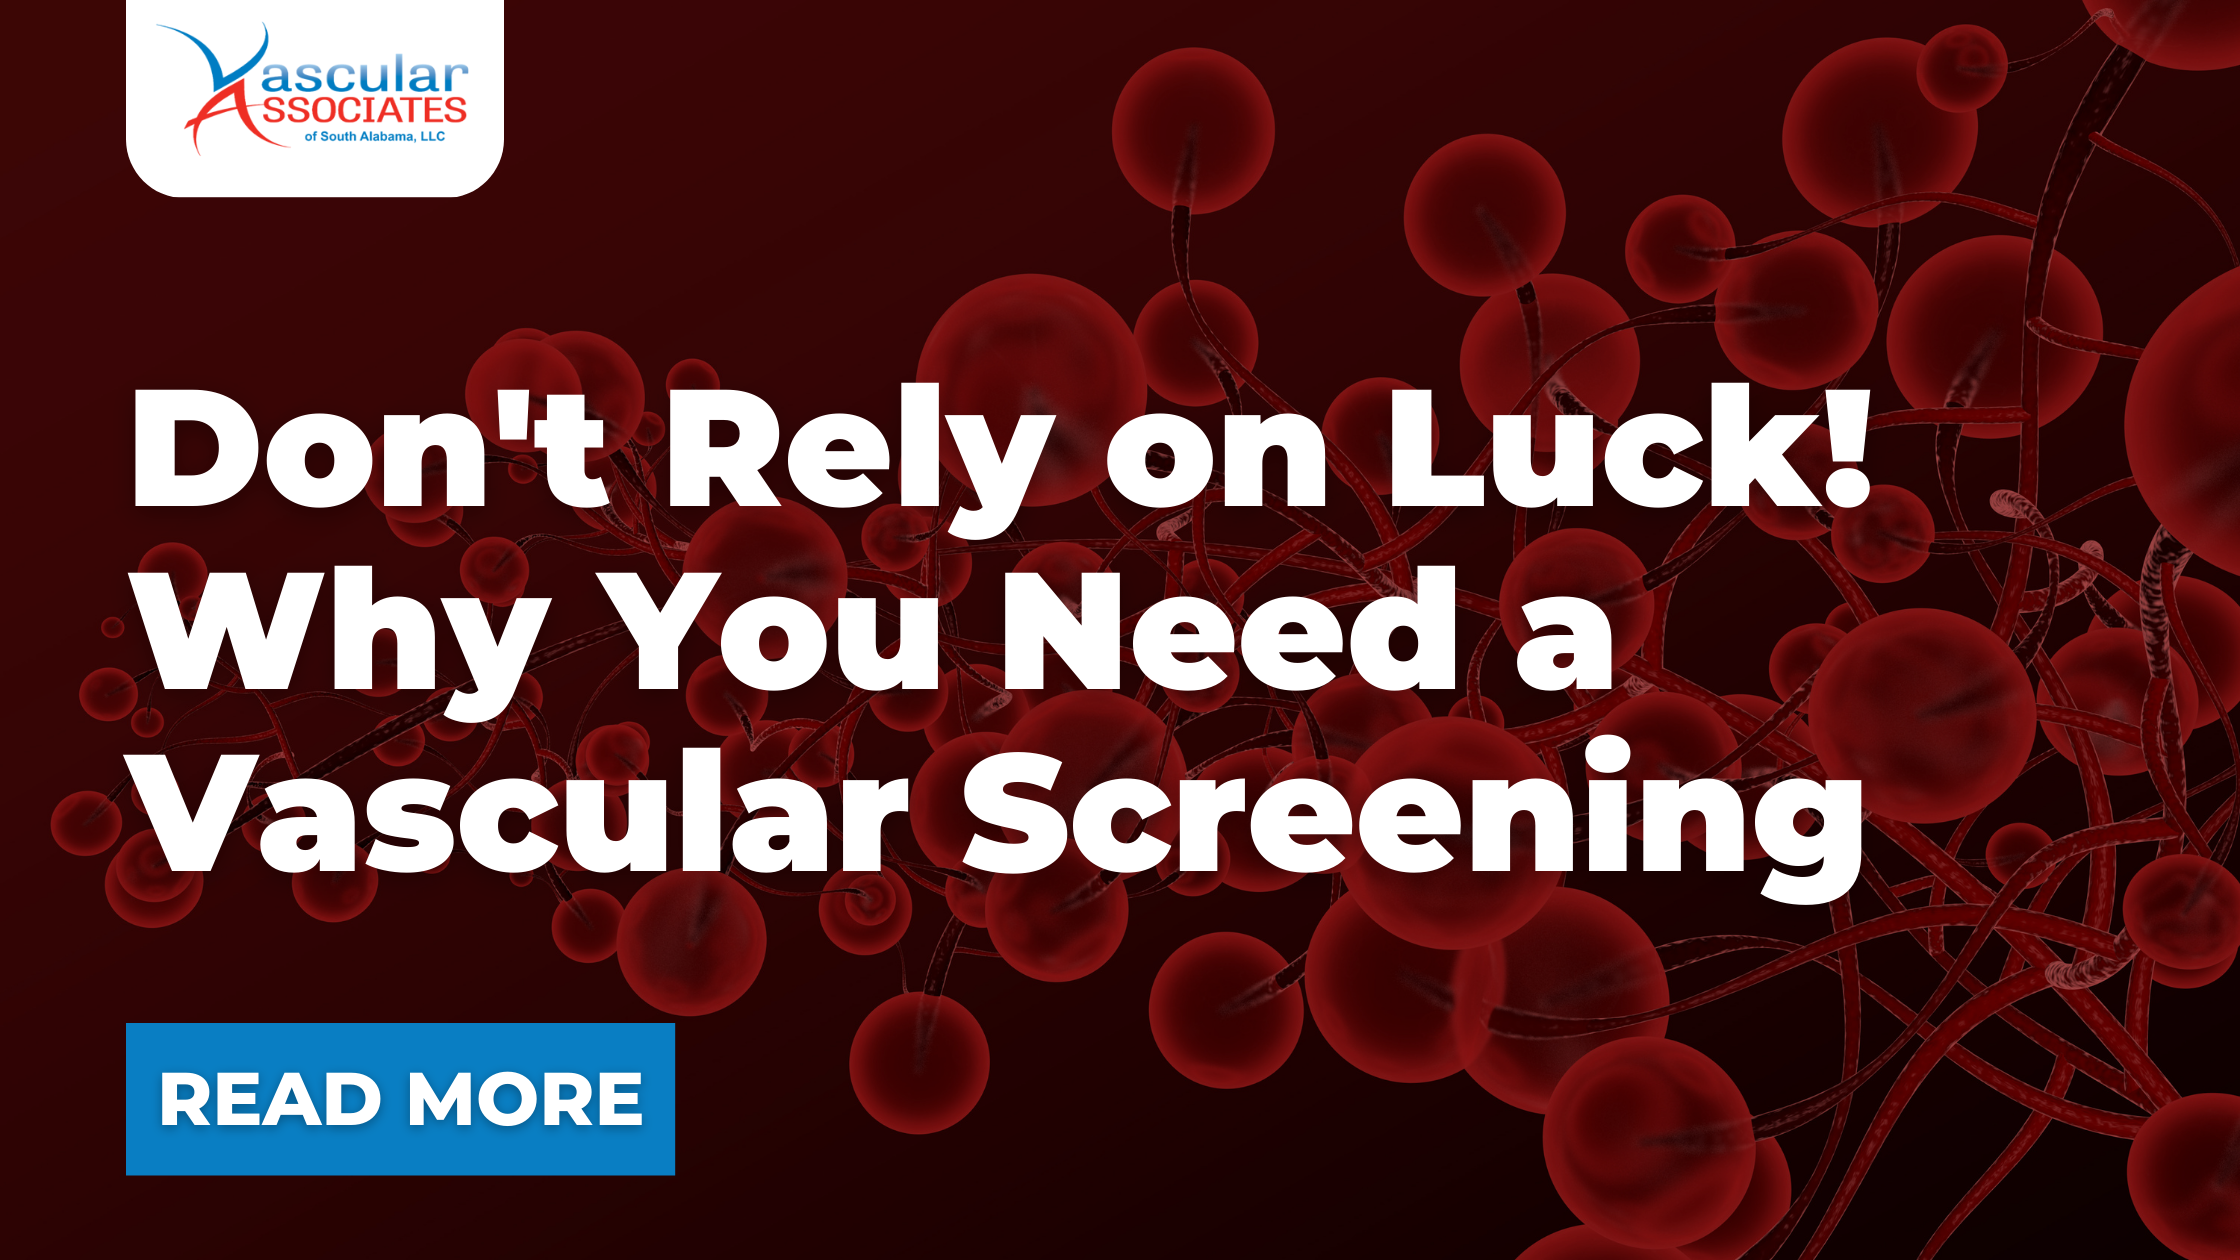 Vascular Blog - Don't Rely on Luck! Why You Need a Vascular Screening.png